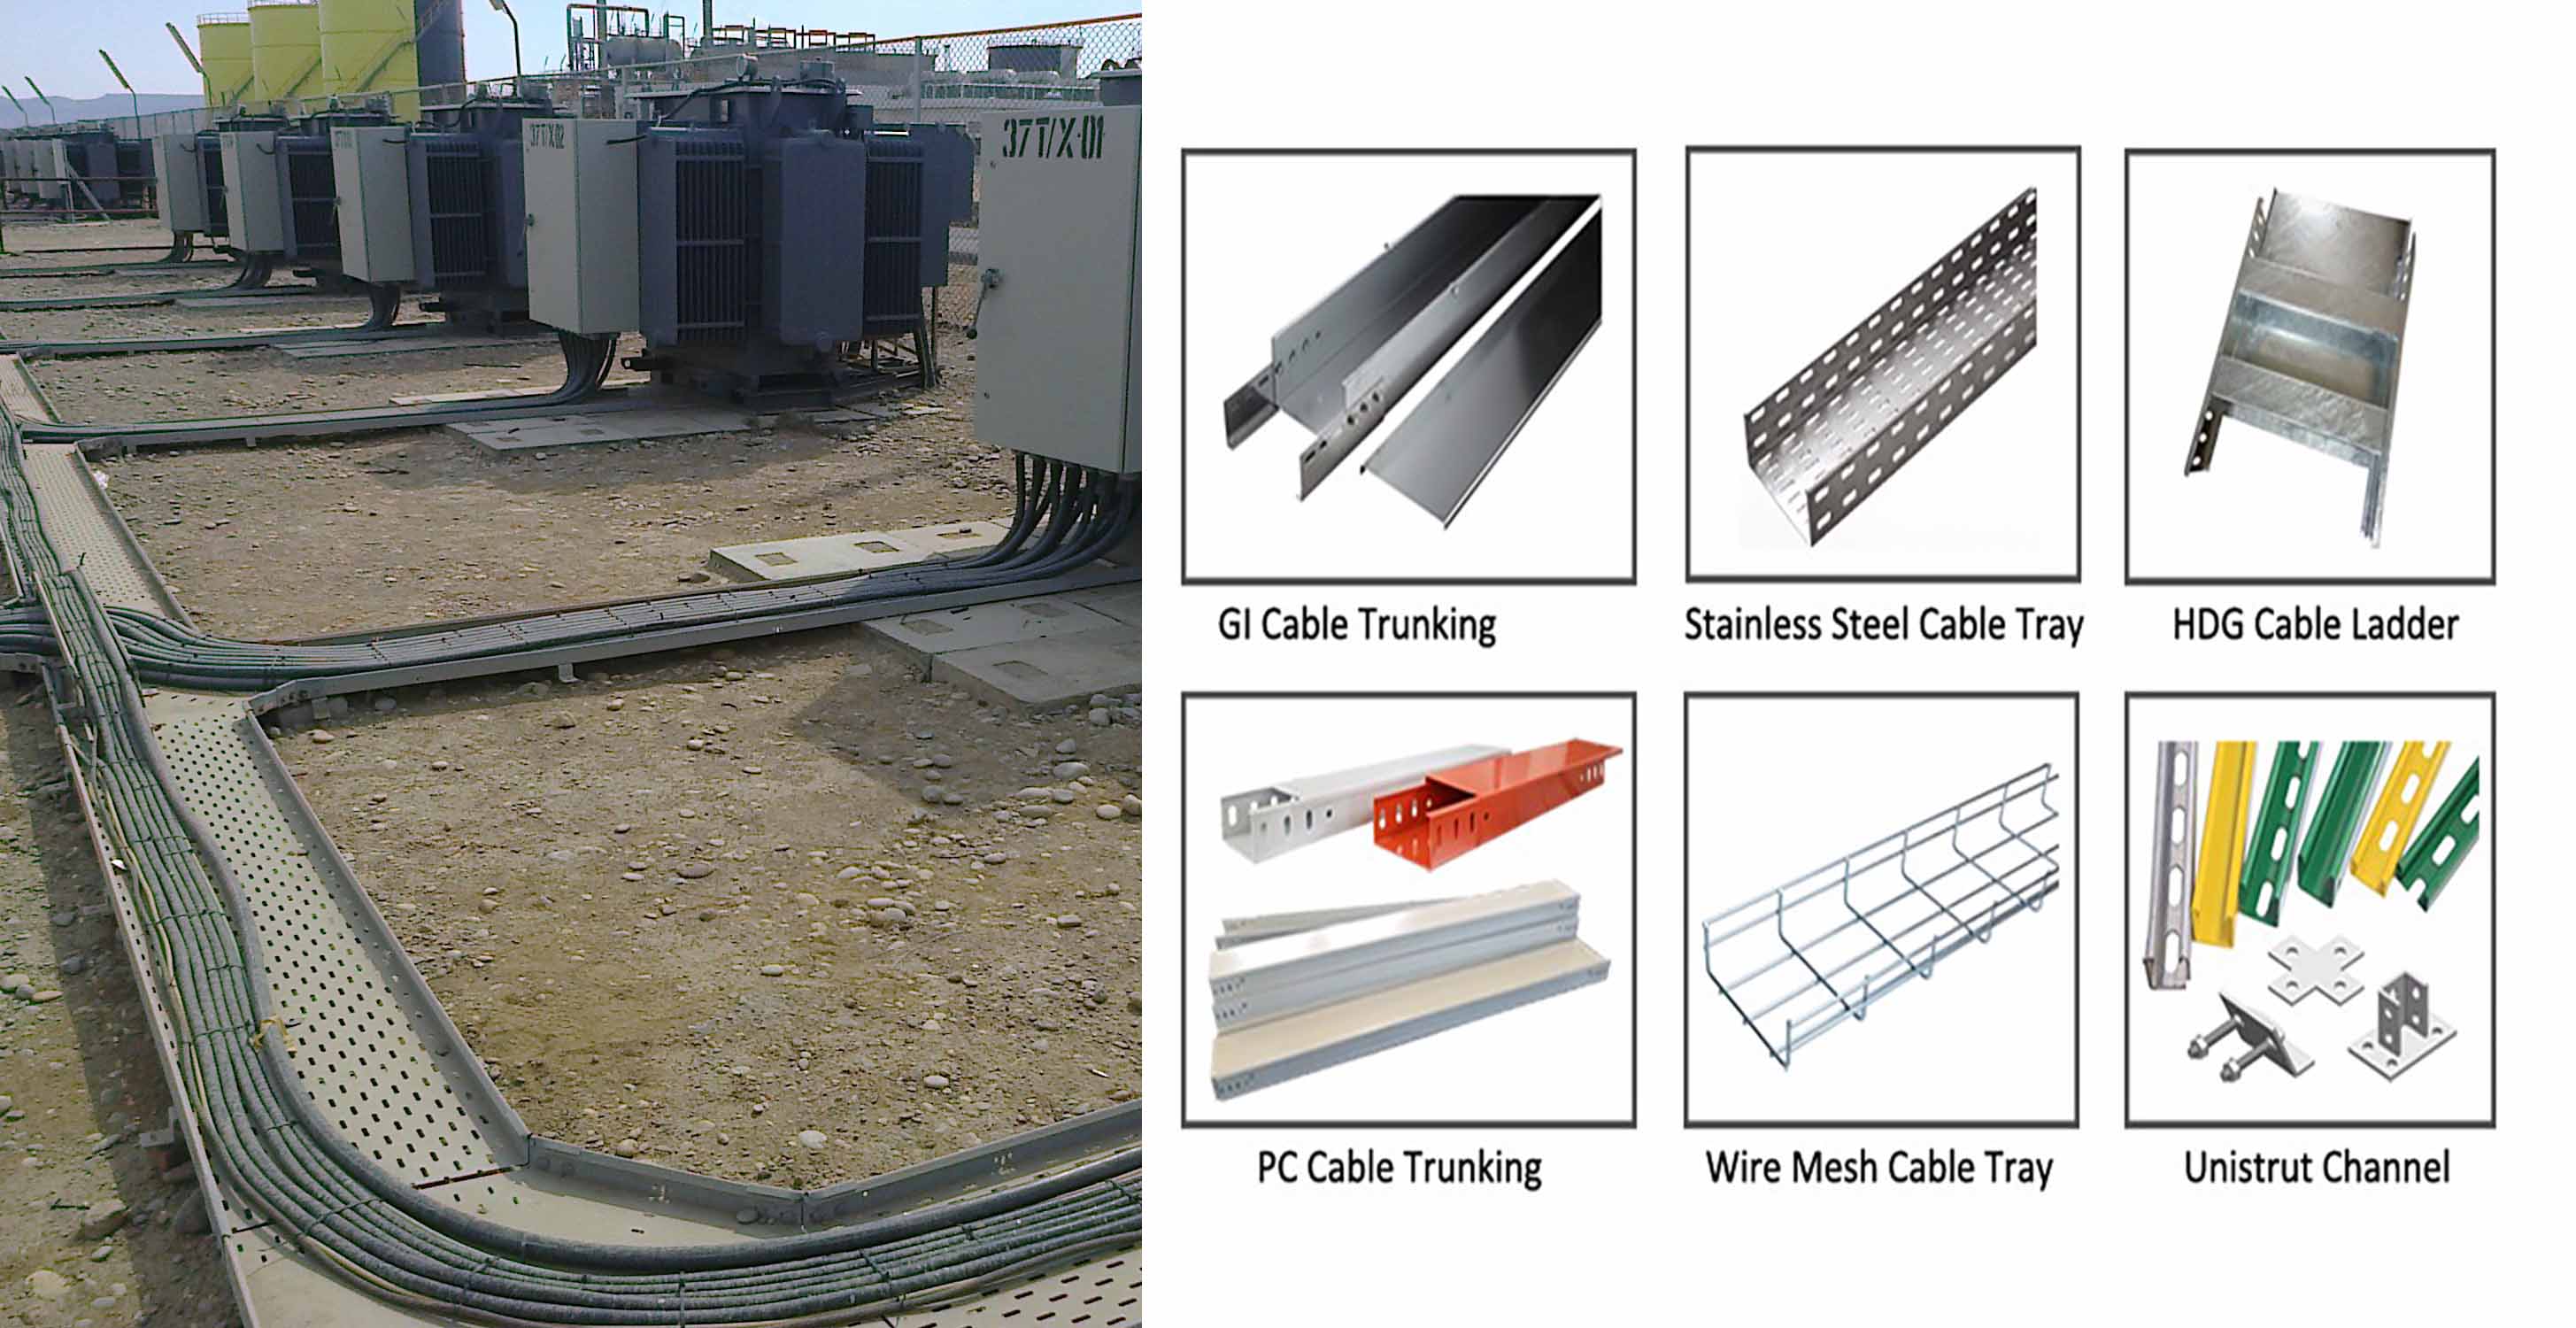 Types of Cable Trays - Purpose, Advantages, Disadvantages